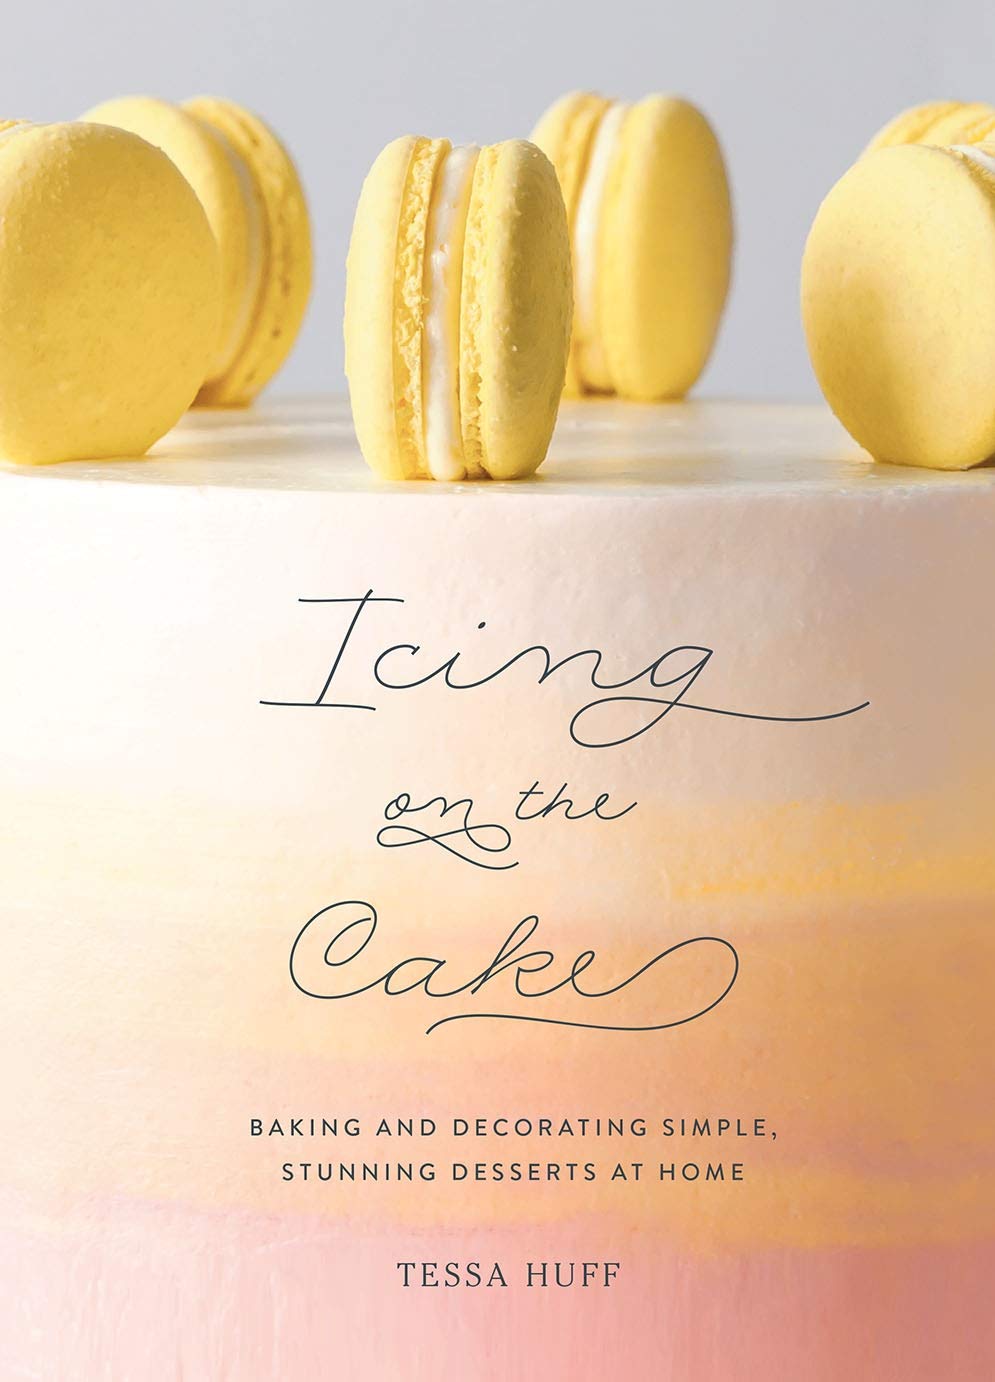 Icing on the Cake: Baking and Decorating Simple, Stunning Desserts at Home (Tessa Huff)